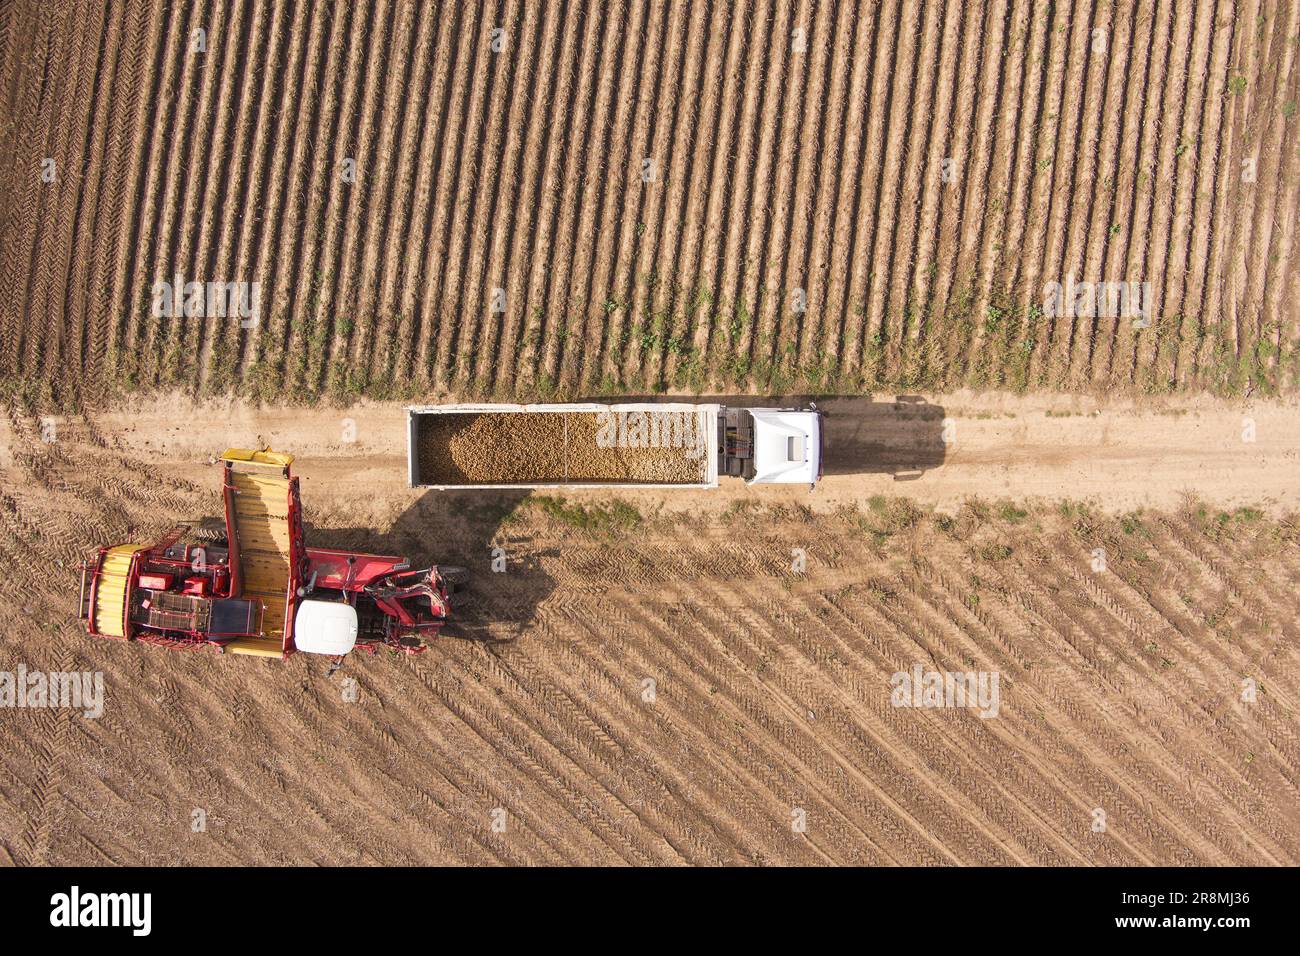 Farming and agriculture. Harvesting potatoes from the field and sorting them on a potato crop machine. Aerial view Stock Photo